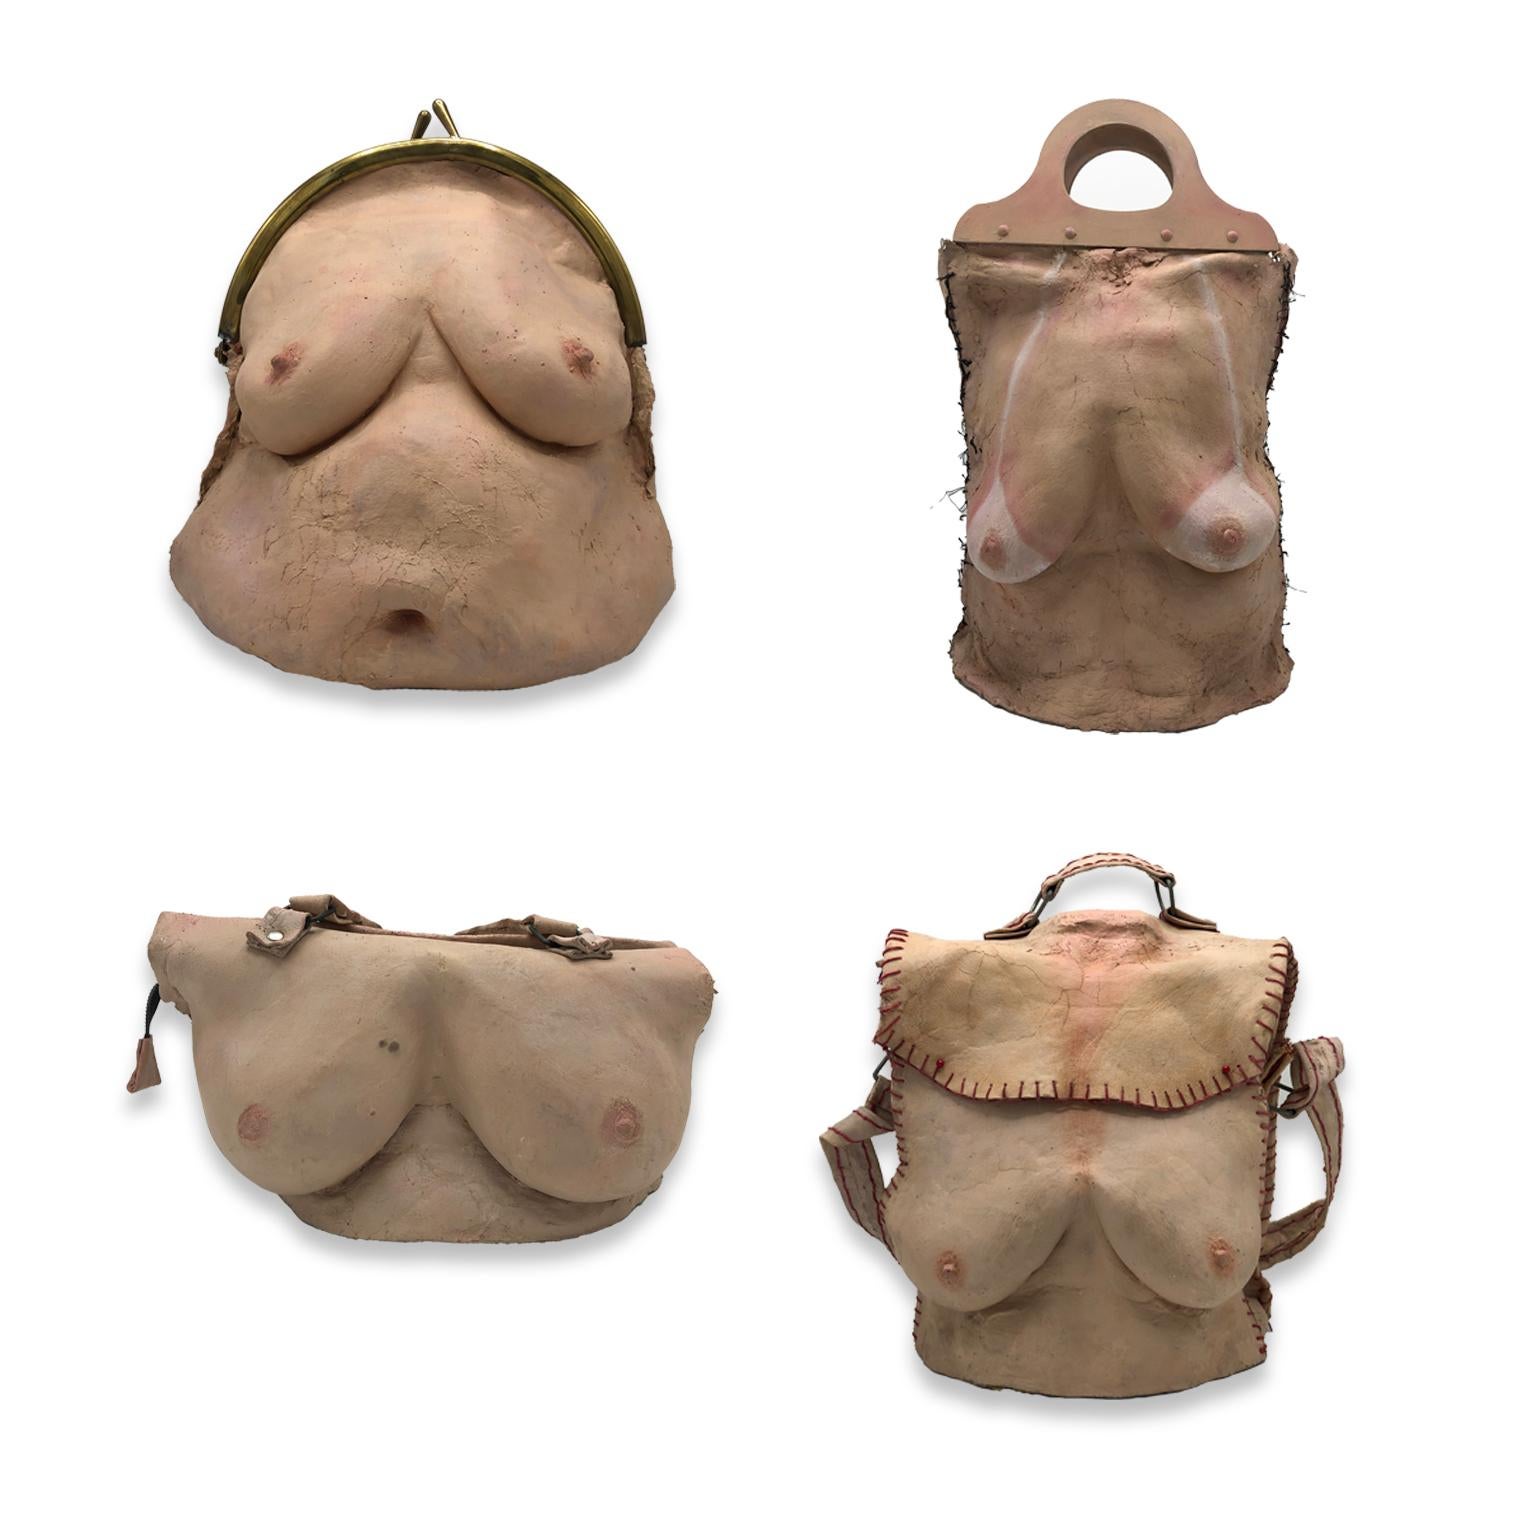 Nude Female Figurative Latex Contemporary Object - Breast Bag IV - Brown Nude Sculpture by Miriam Meulepas